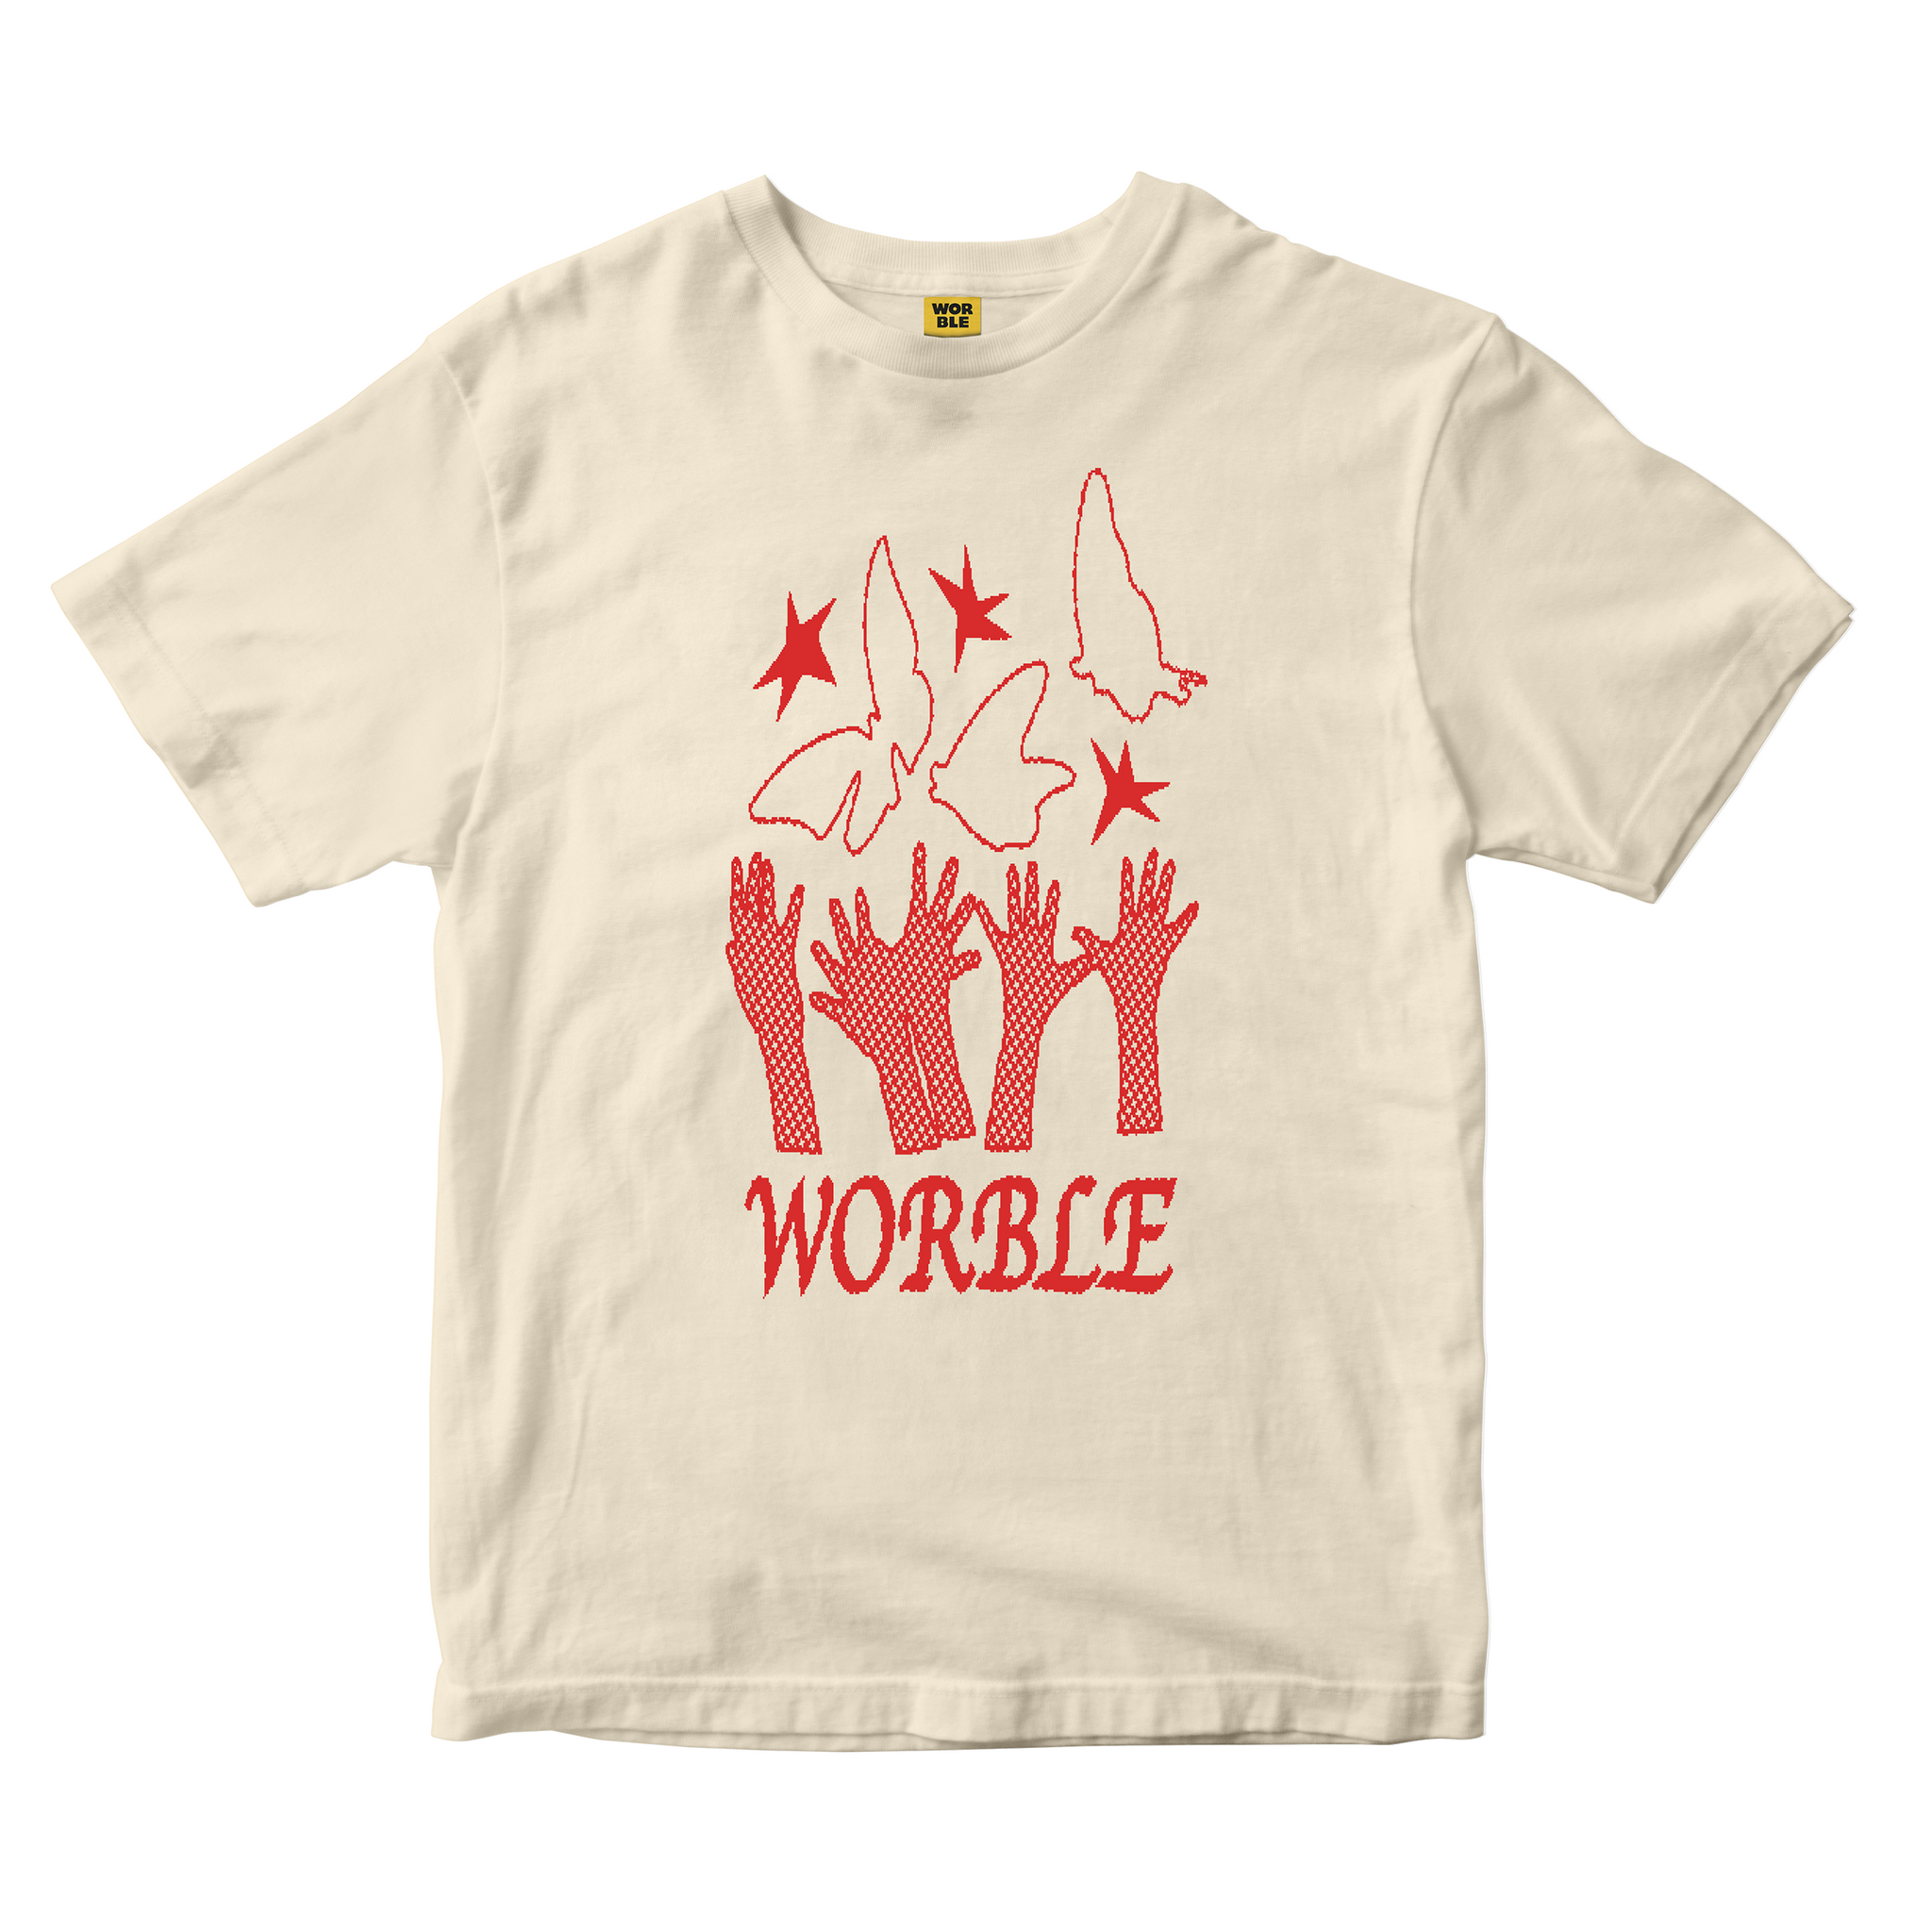 FREE FOR ALL TEE (IVORY) - WHOLESALE